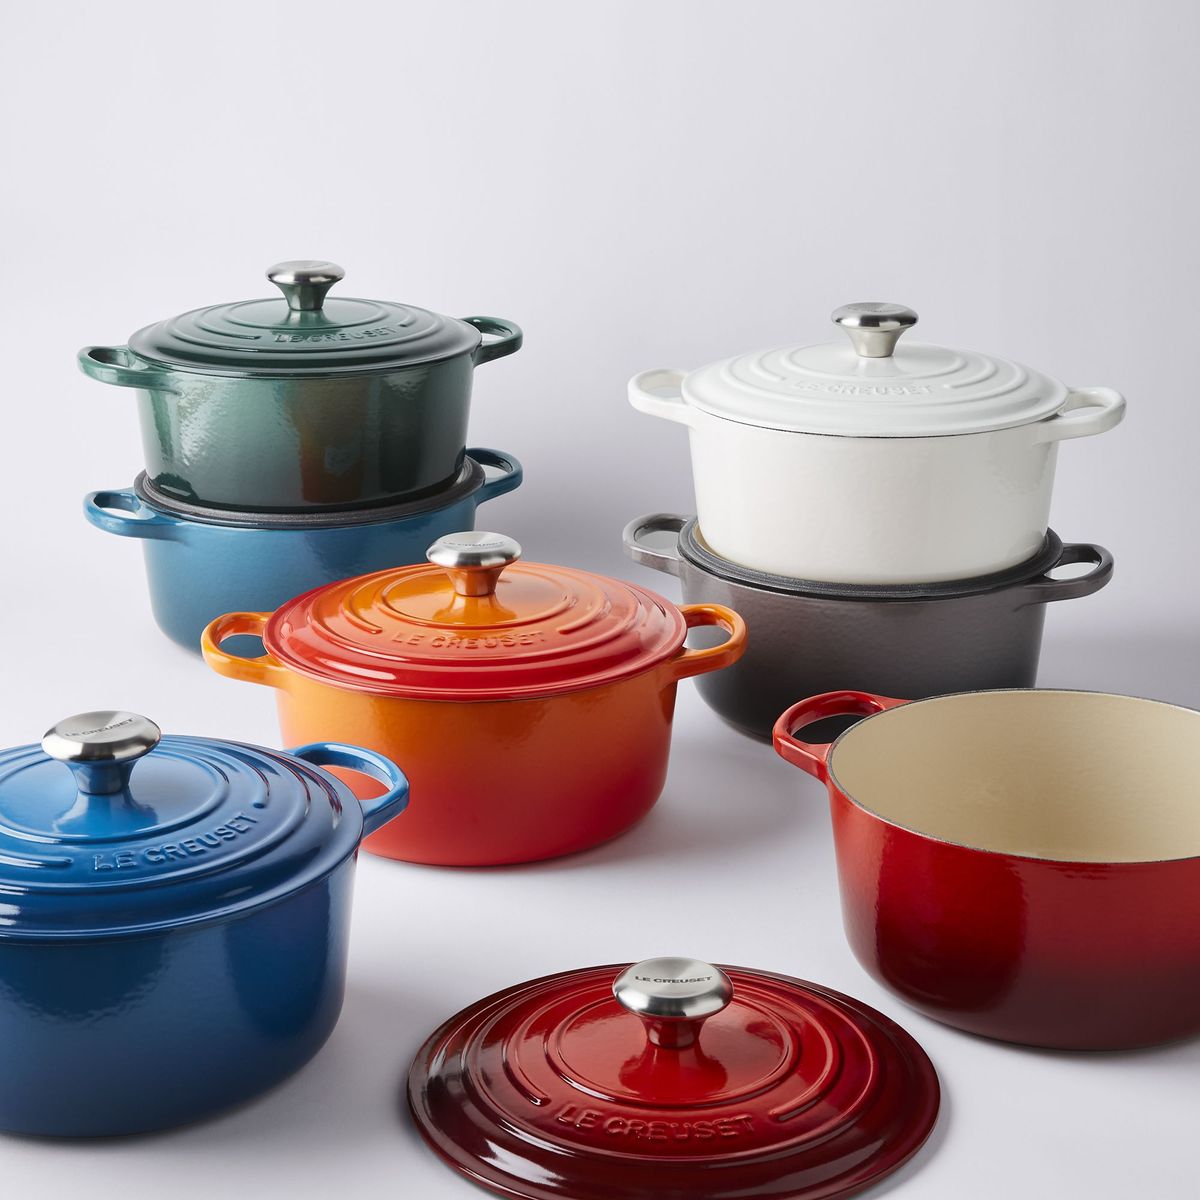 le creuset dutch oven sale nordstrom half yearly sale